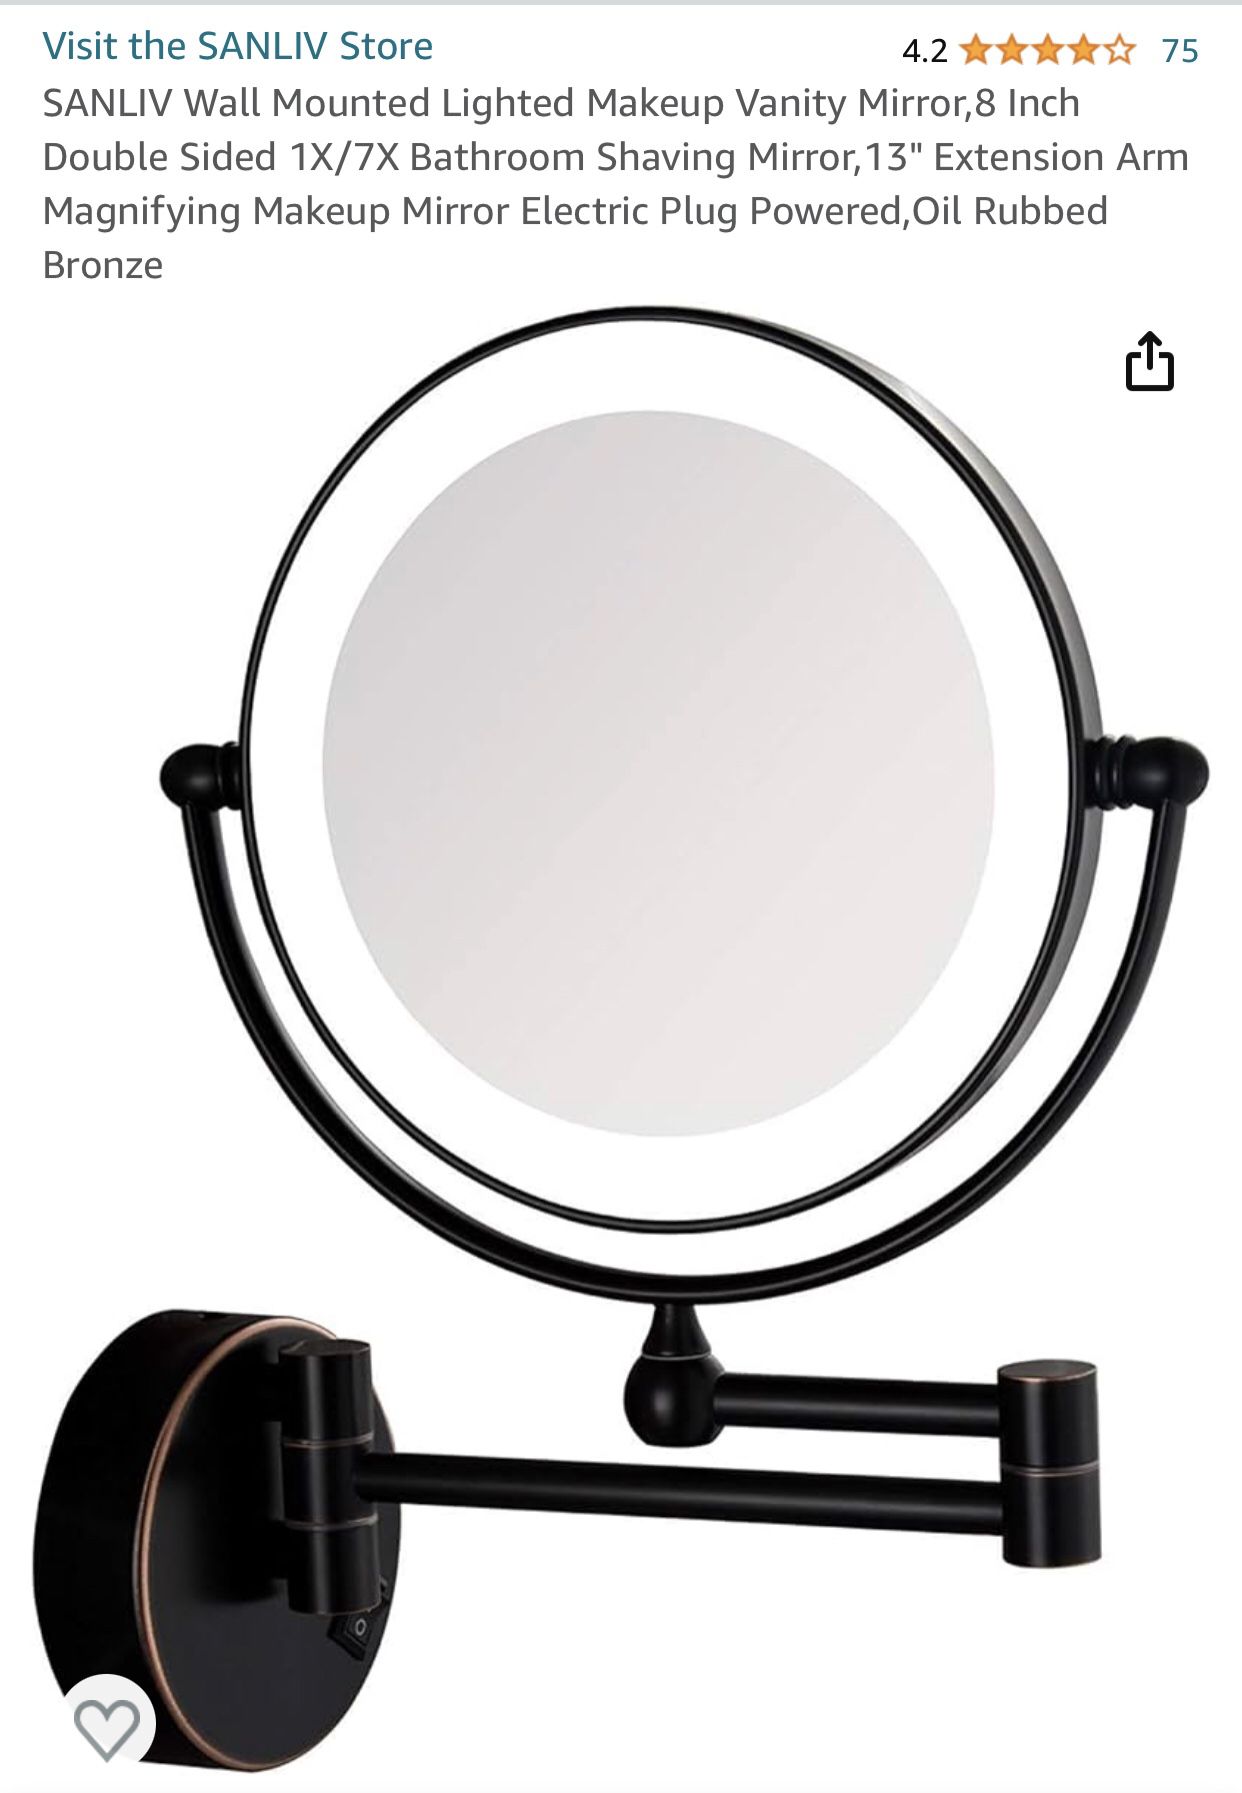 Wall Mounted Lighted Makeup Mirror